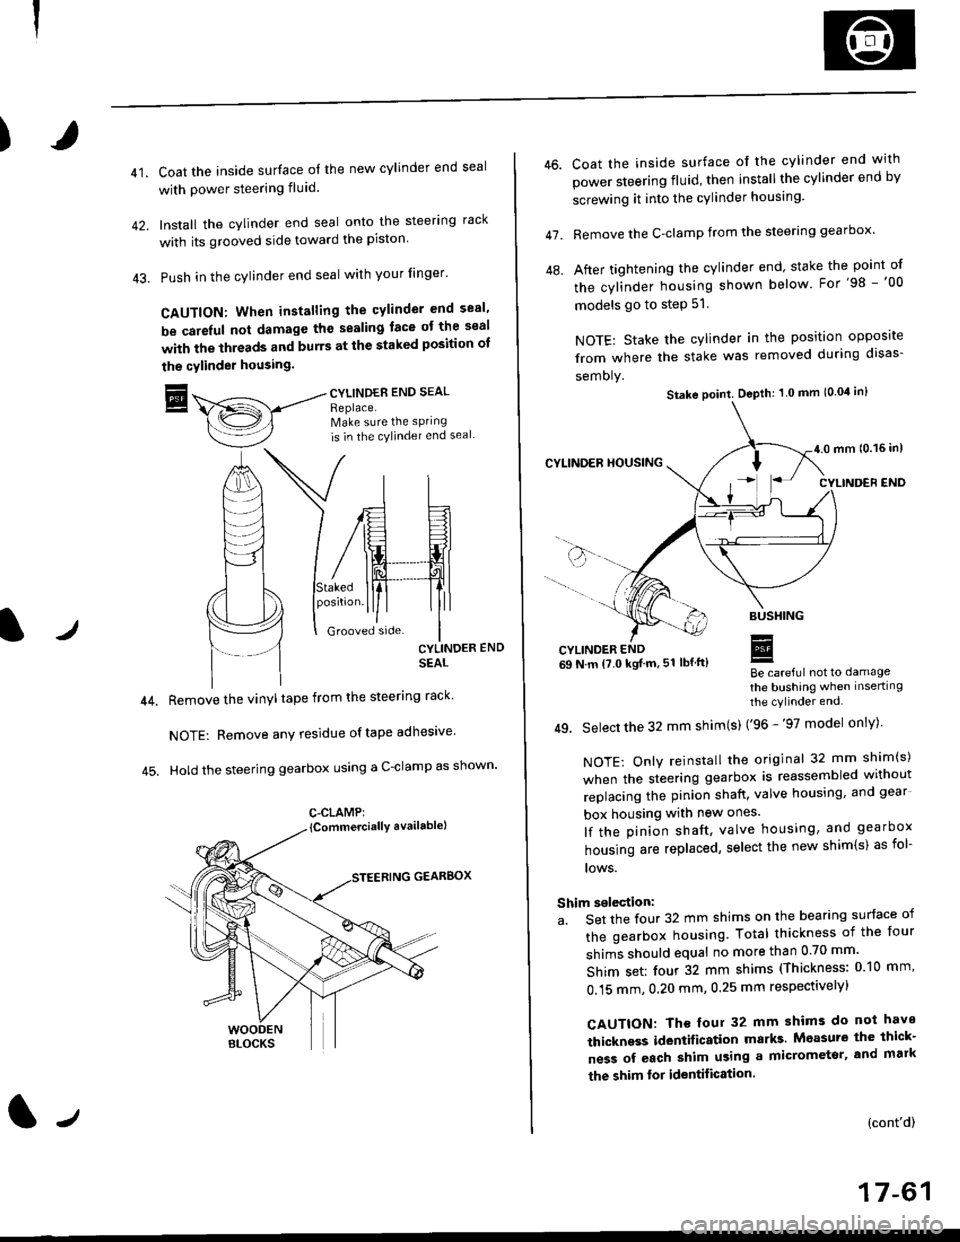 HONDA CIVIC 1998 6.G Service Manual )
41.Coat the inside surface of the new cylinder end seal
with power steering fluid.
Install the cylinder end seal onto the steering rack
with its grooved side toward the piston
Push in the cylinder 